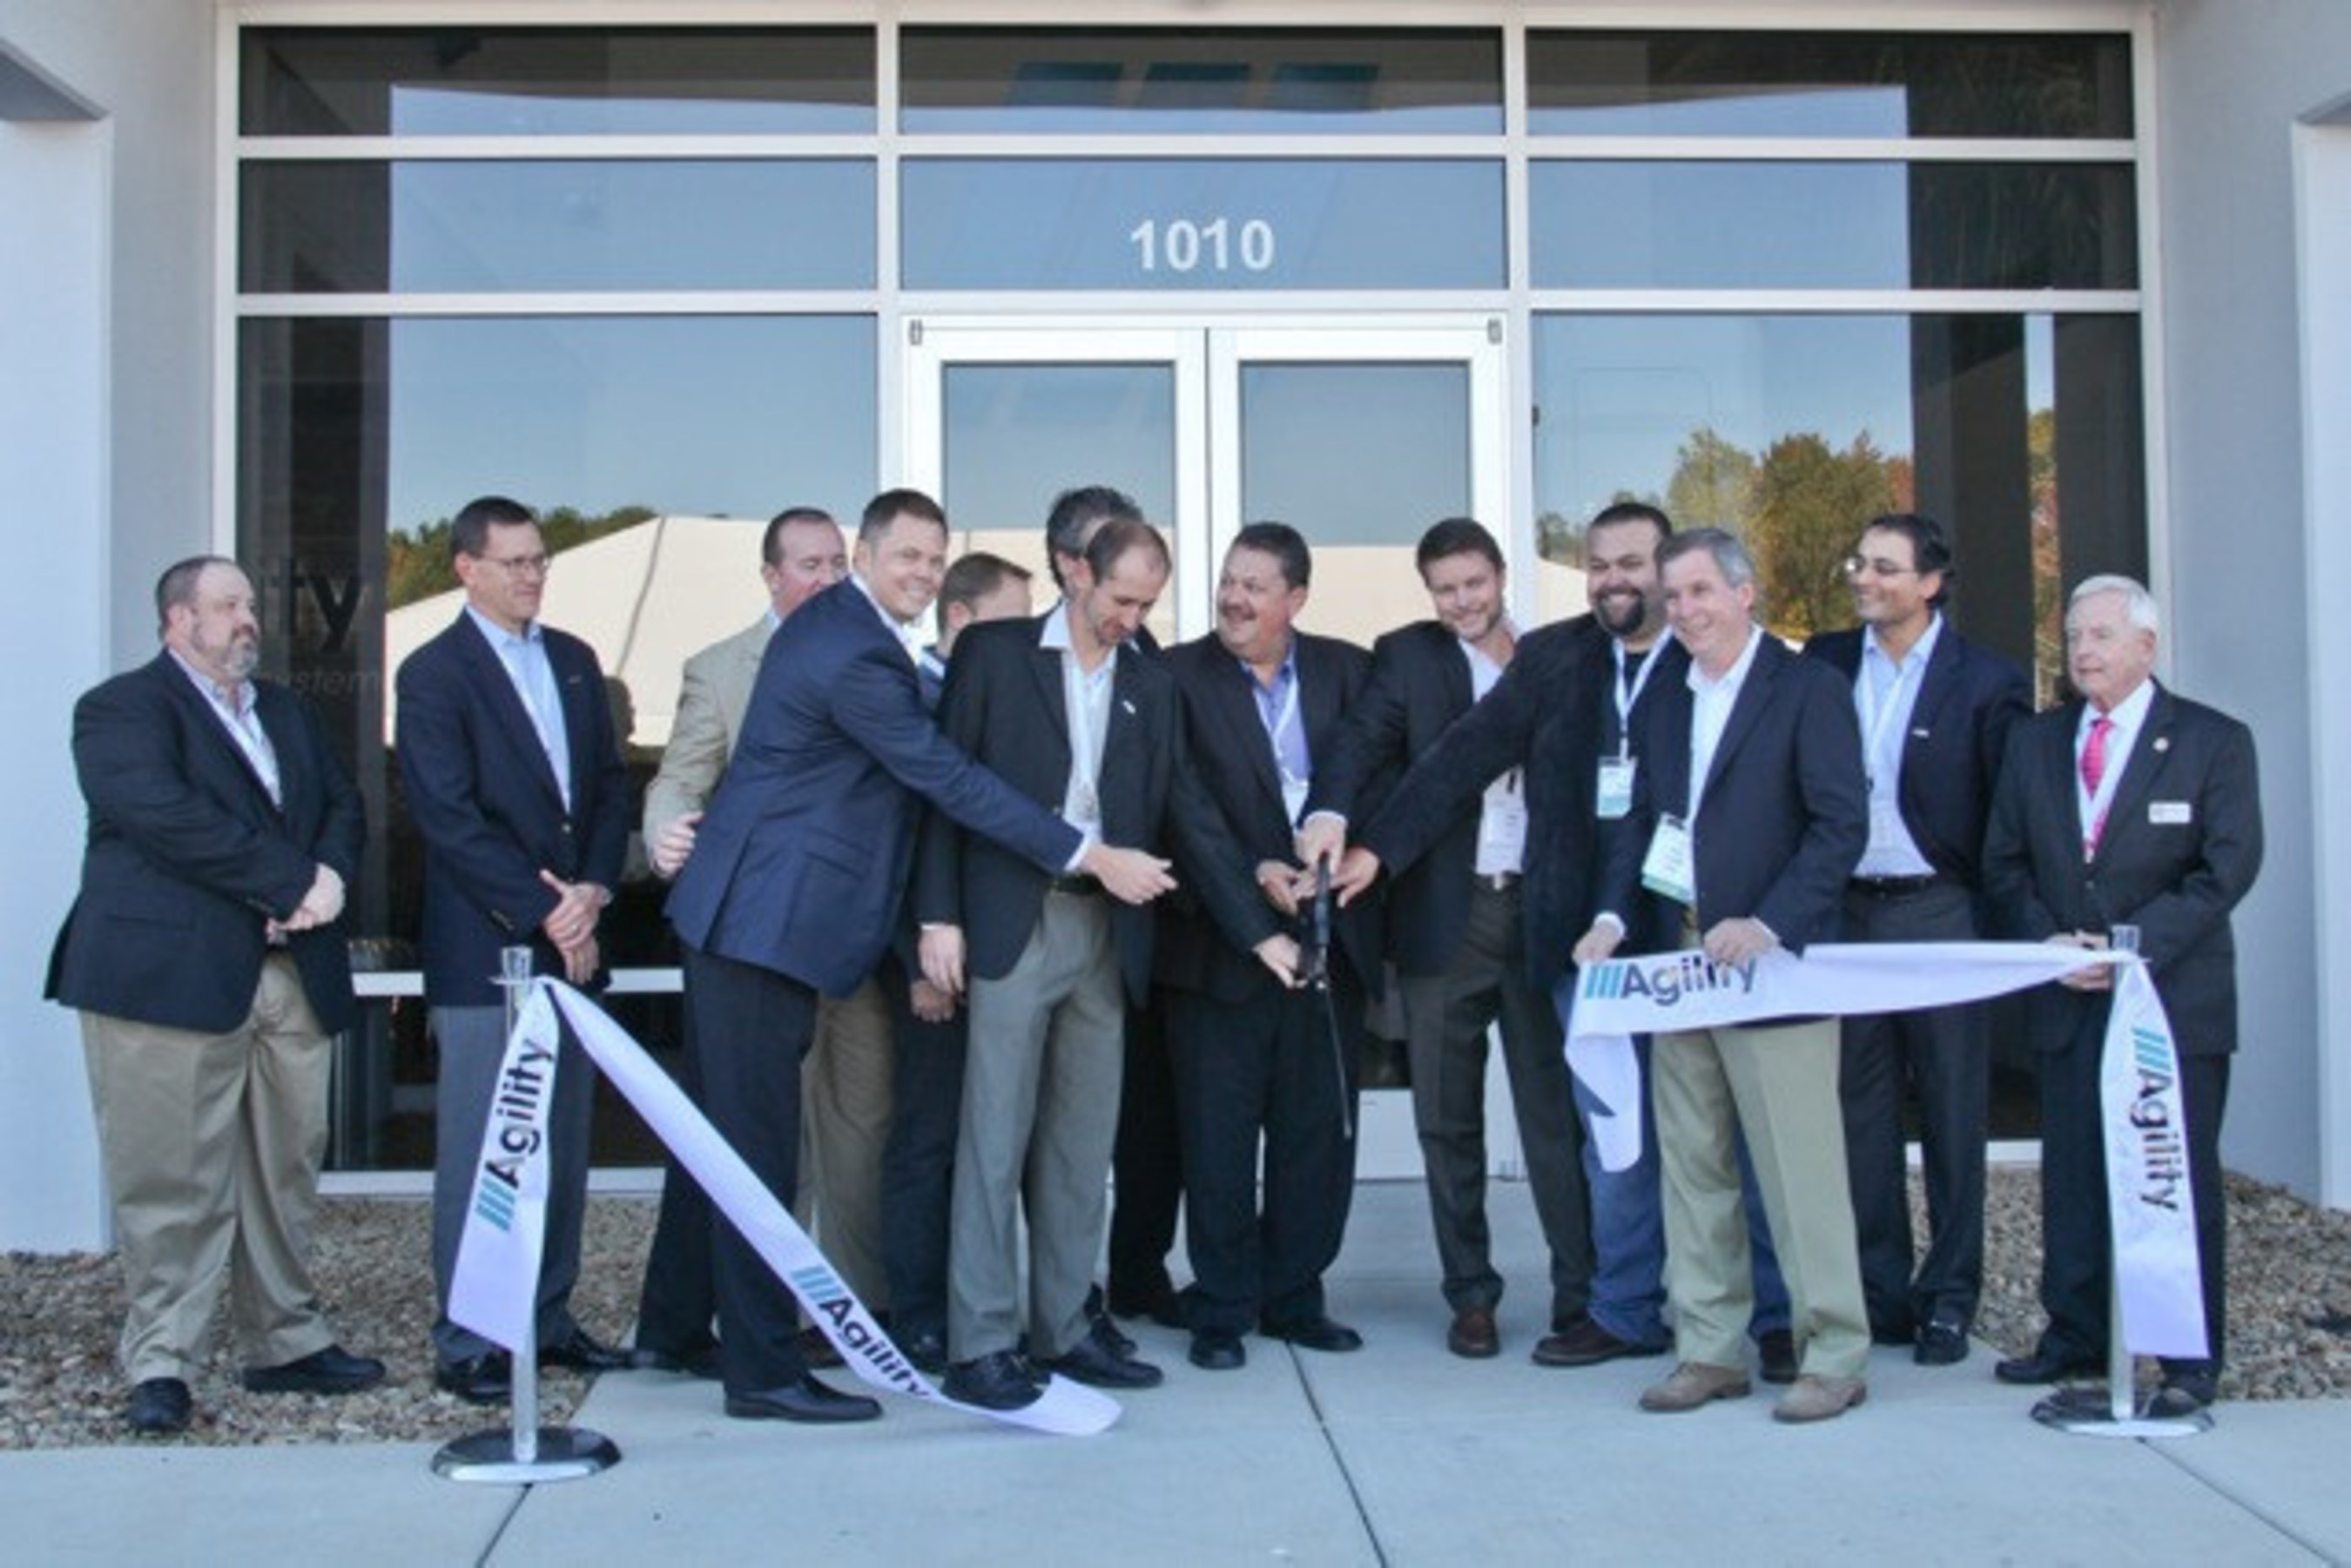 Agility executives, Board of Director members and company founders cut the ribbon that officially opens the new Salisbury, North Carolina facility